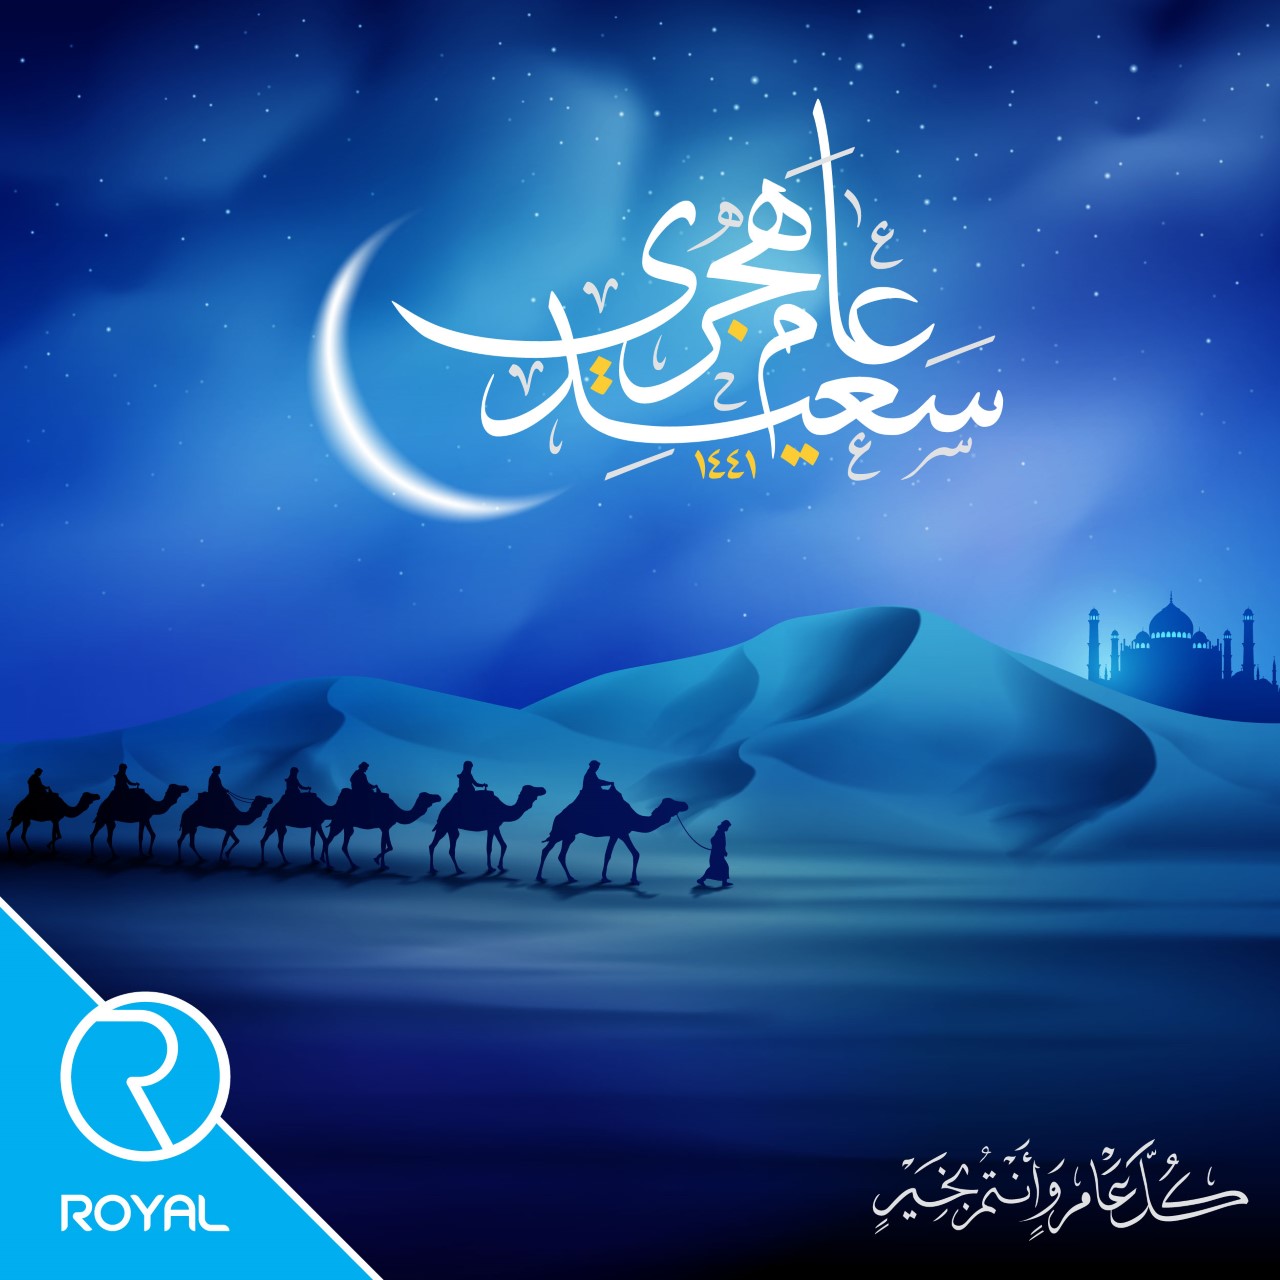 Royal wishes you a new Hijri year